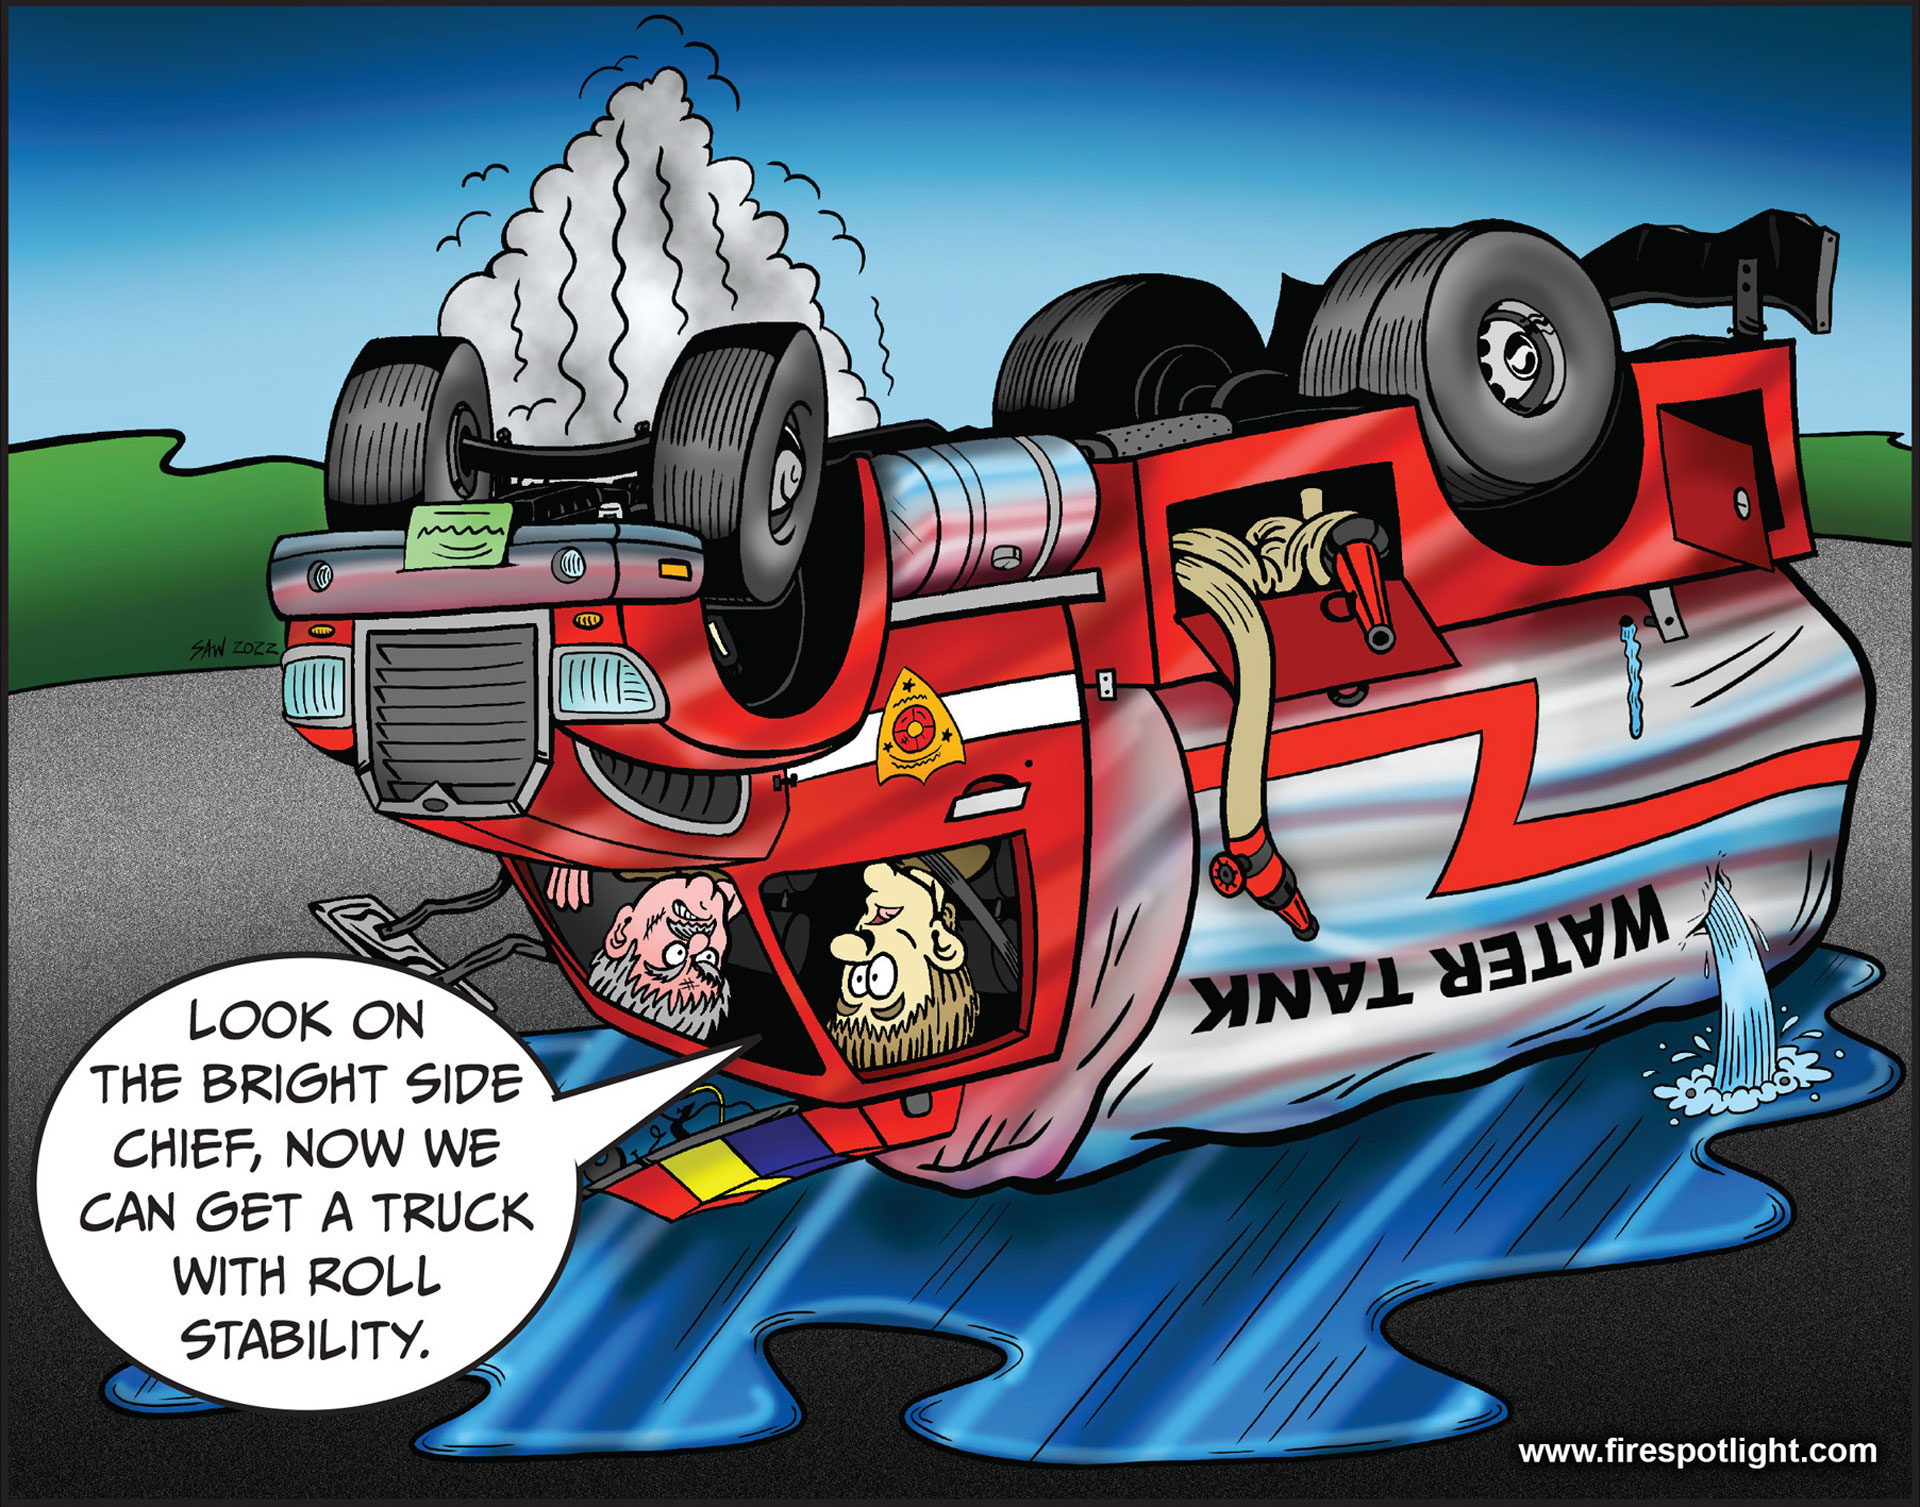 Featured image for “Rollover Stability Control”